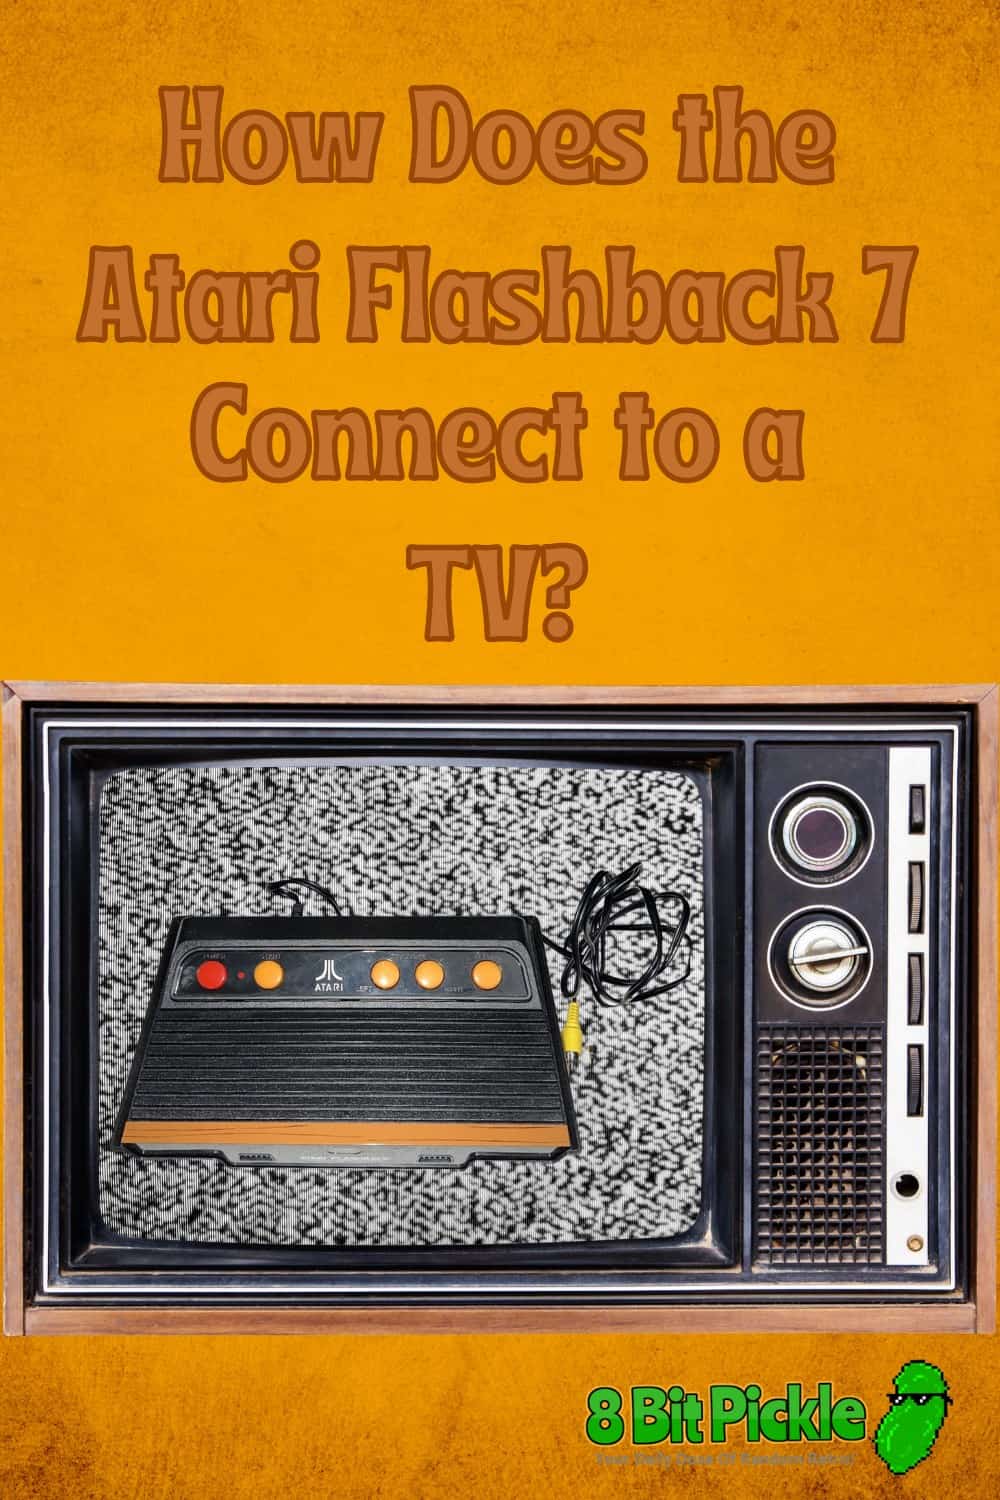 Use composite cables to connect and Atari Flashback 7